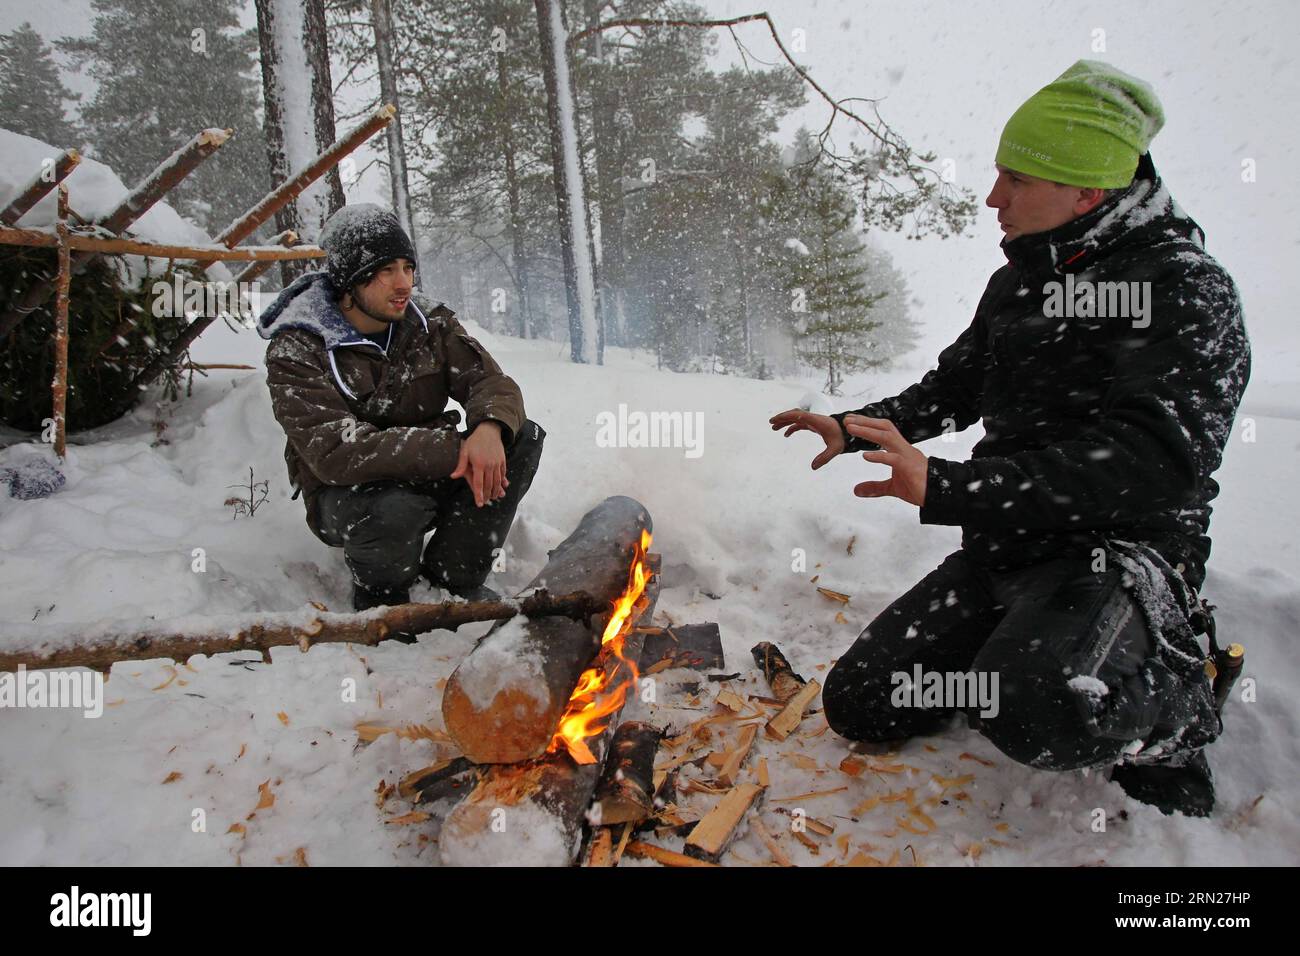 (150215) -- HELSINKI, Feb. 12, 2015 -- A Finnish coach (R) teaches a French tourist how to set fire on snow in Savukoski, northern Finland, on Feb. 12, 2015. As being trained to live in Arctic wilderness is becoming a popular recreation, many European choose to travel to Finnish Lapland to spend their winter vacations. ) FINLAND-SAVUKOSKI-ARCTIC WILDERNESS-VACATION LixJizhi PUBLICATIONxNOTxINxCHN   Helsinki Feb 12 2015 a Finnish Coach r teaches a French Tourist How to Set Fire ON Snow in  Northern Finland ON Feb 12 2015 As Being trained to Live in Arctic Wilderness IS Becoming a Popular Recrea Stock Photo